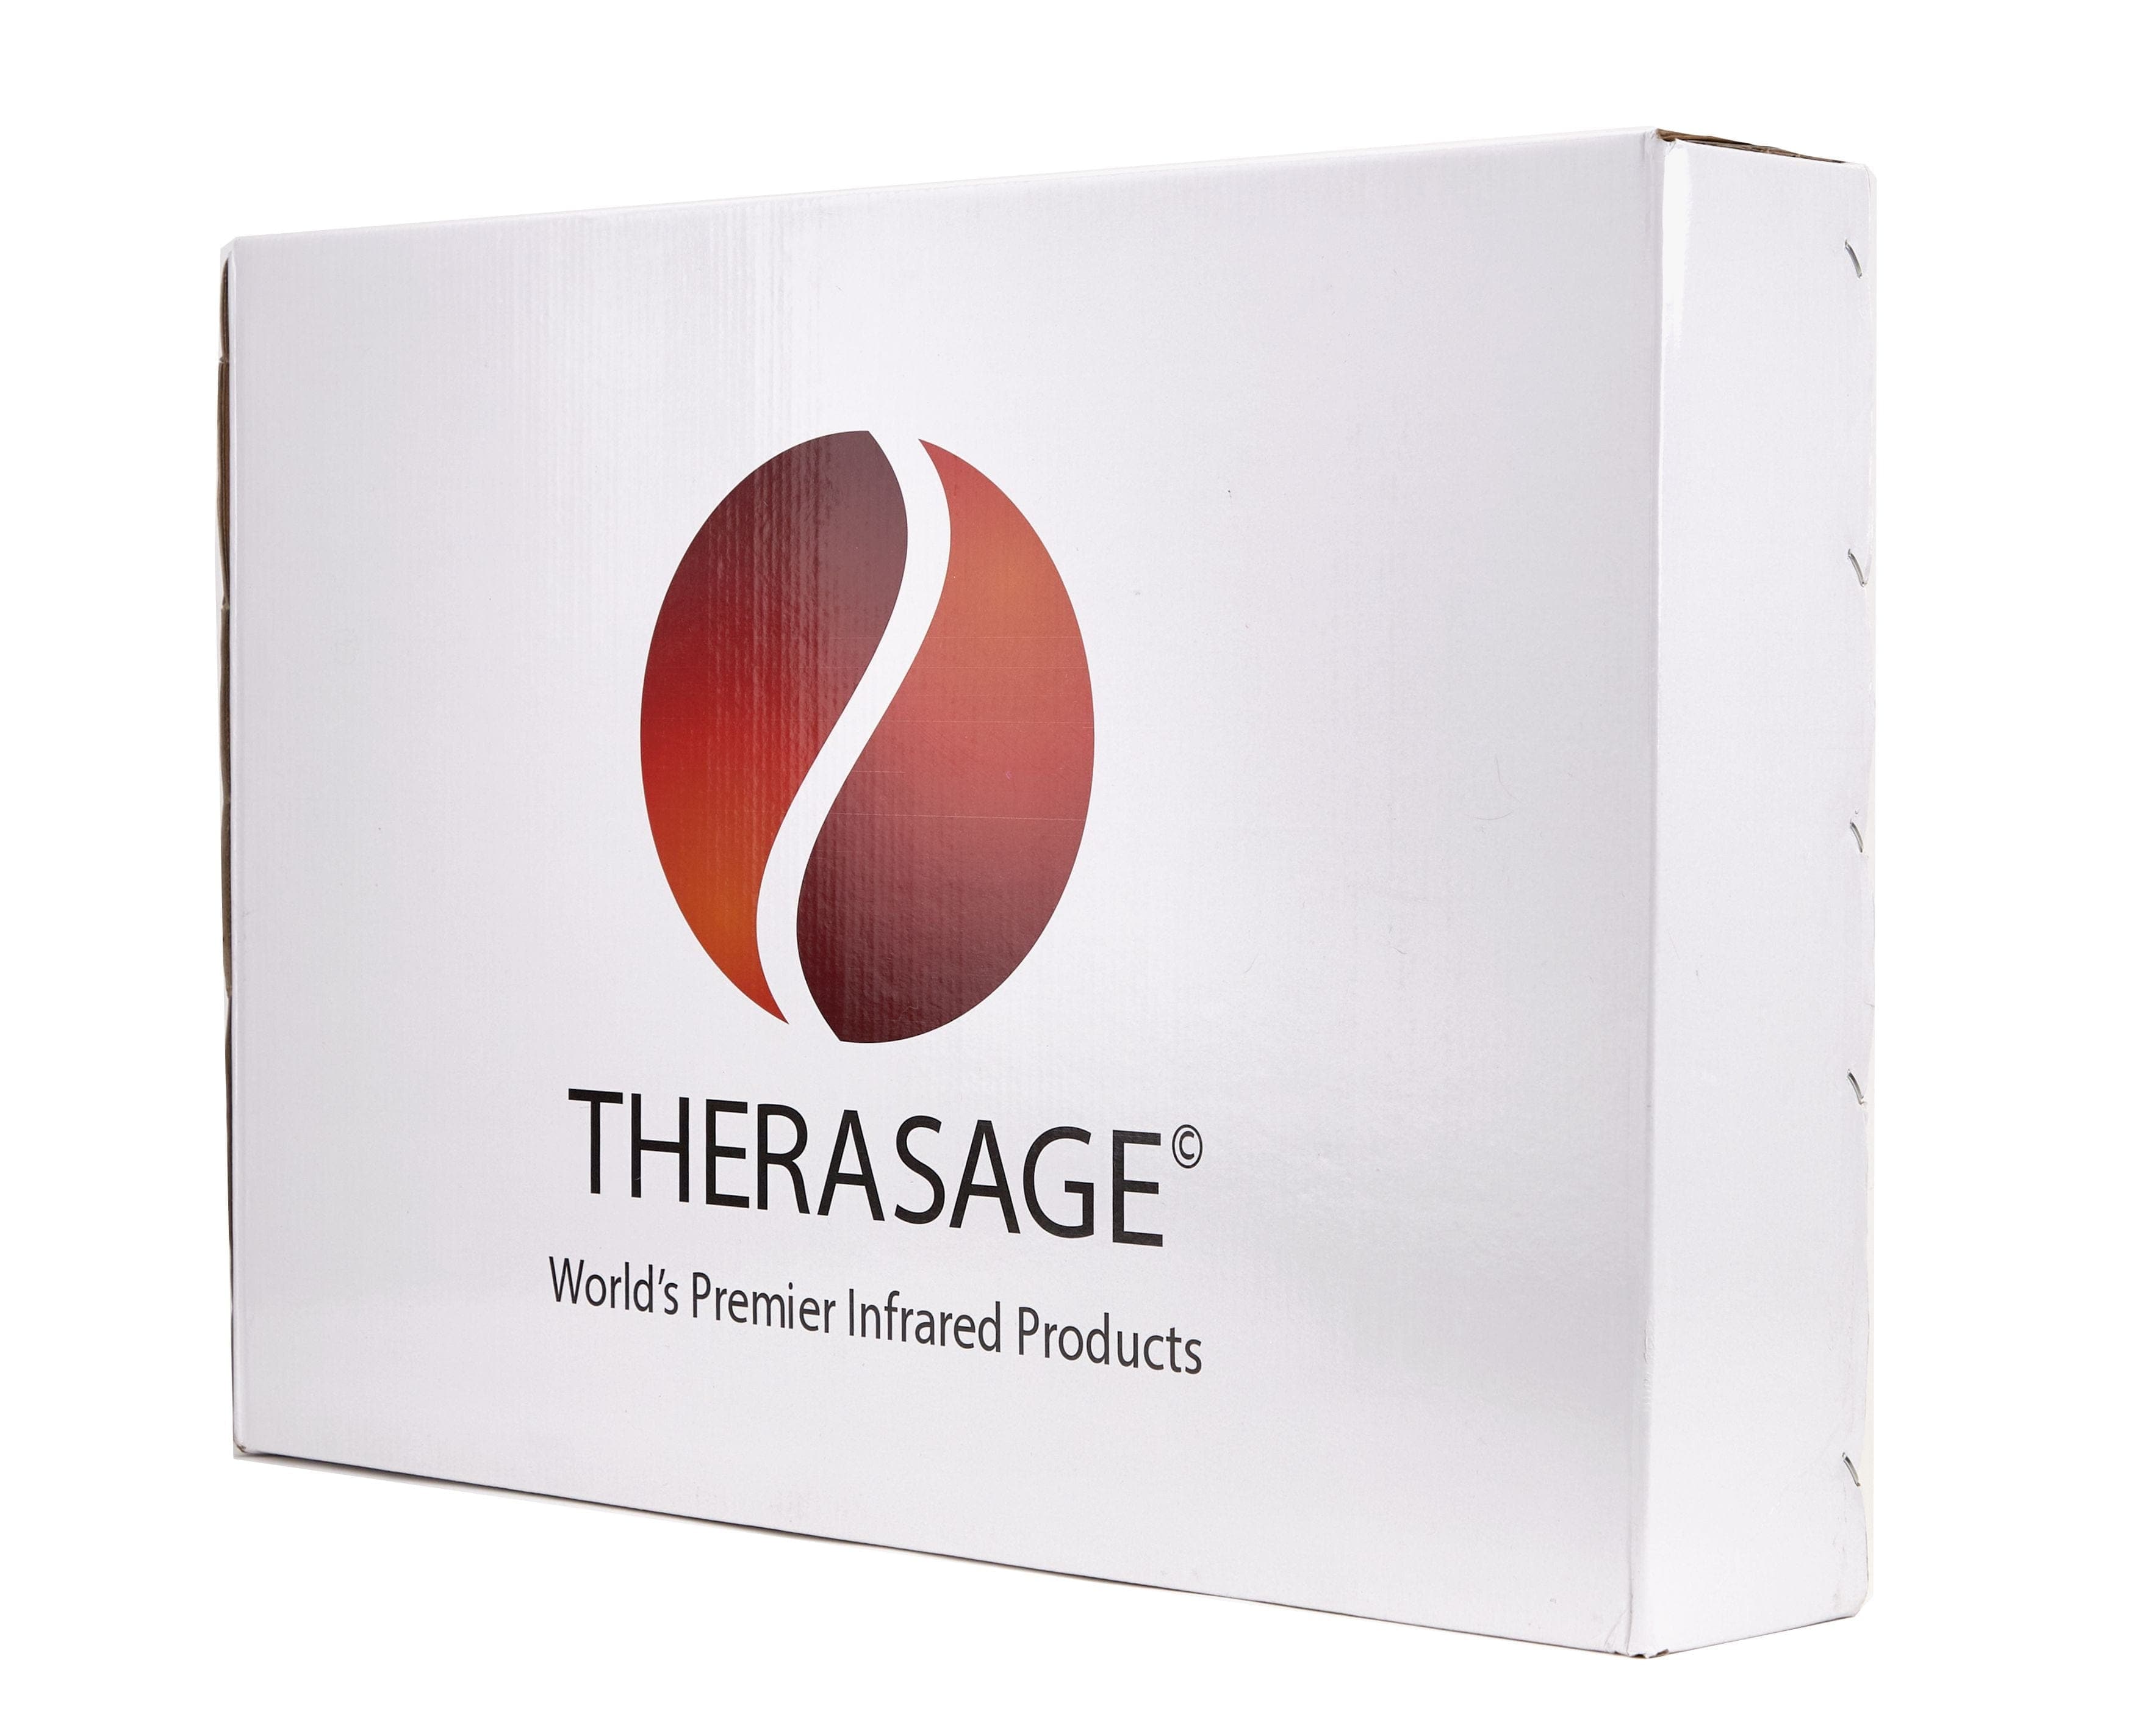 Therasage All Therasage Healing Pad Small - Worldwide Voltage (110-240v)